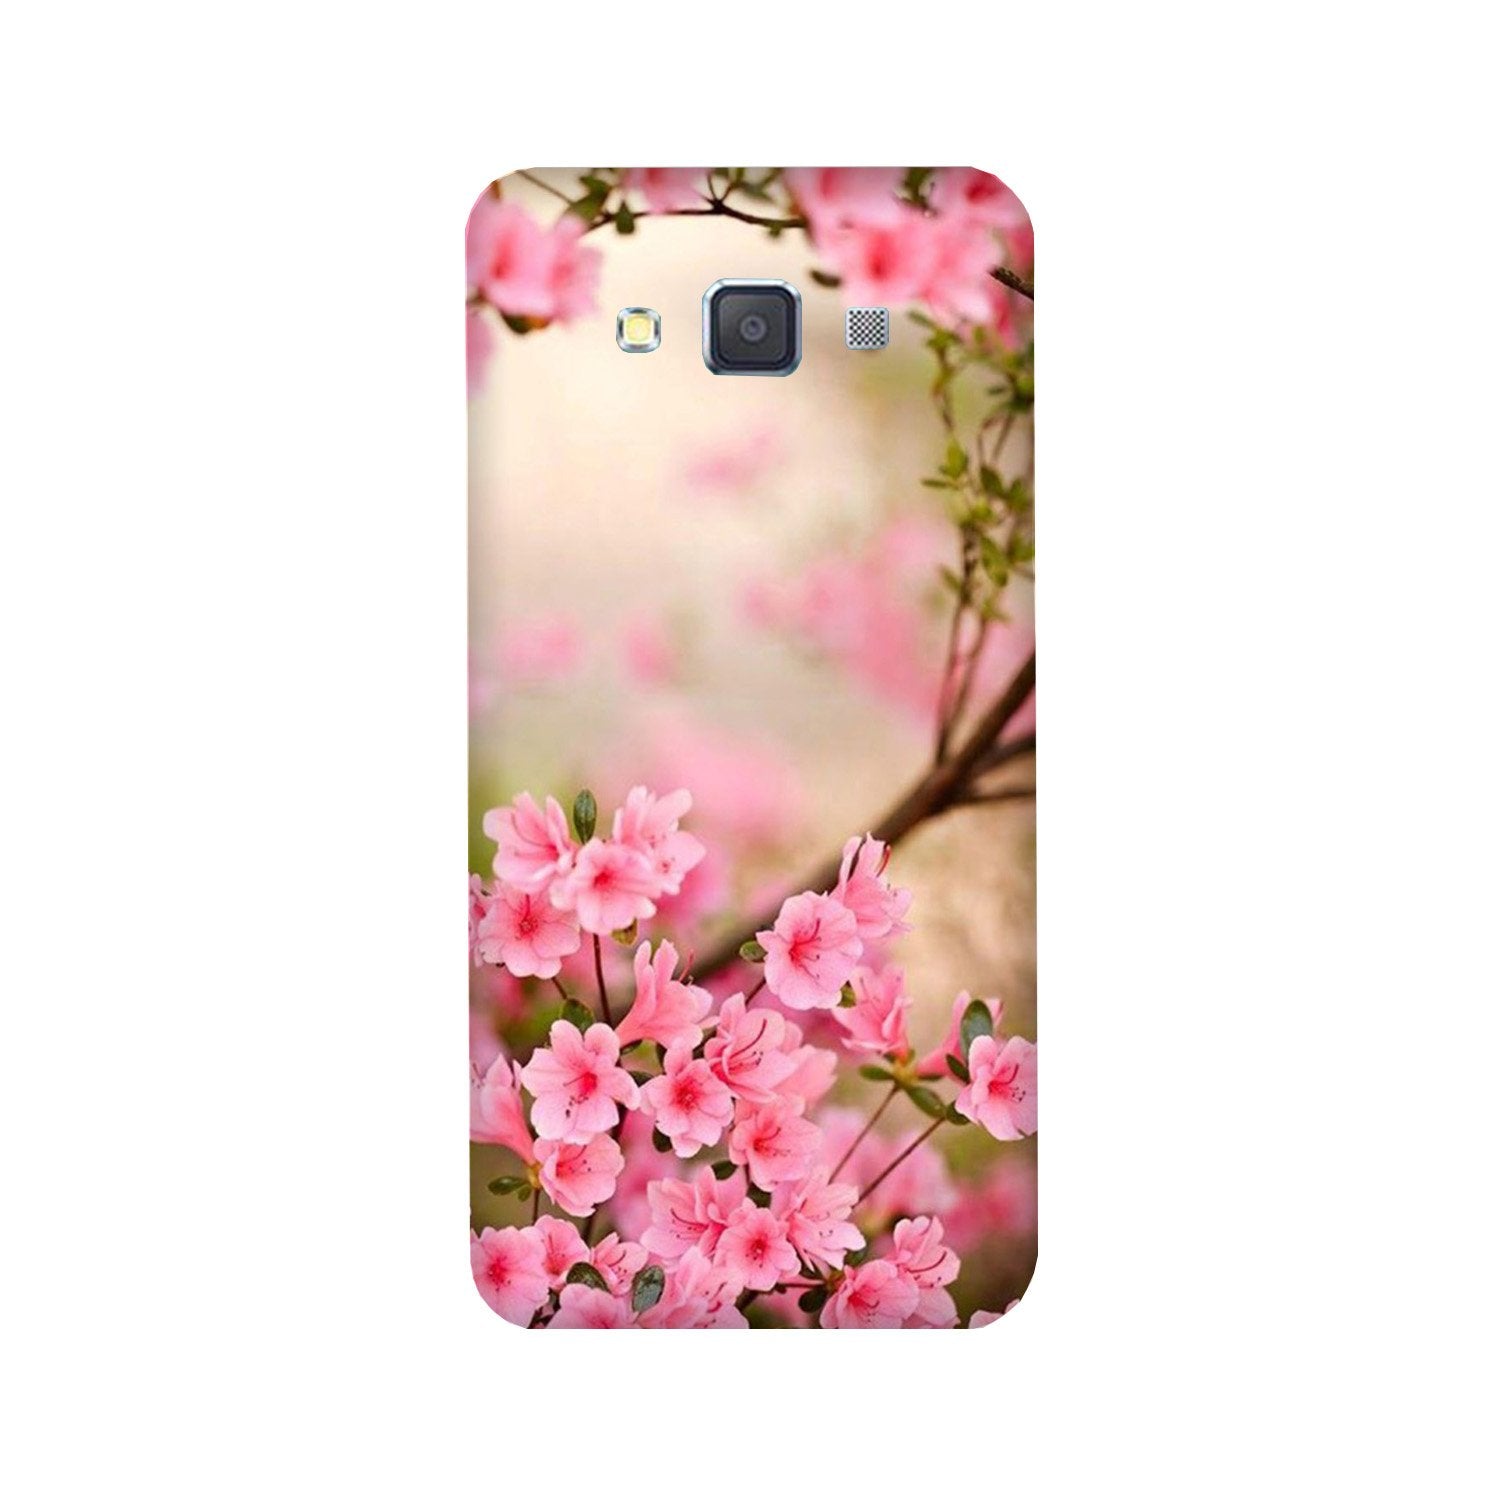 Pink flowers Case for Galaxy Grand Max